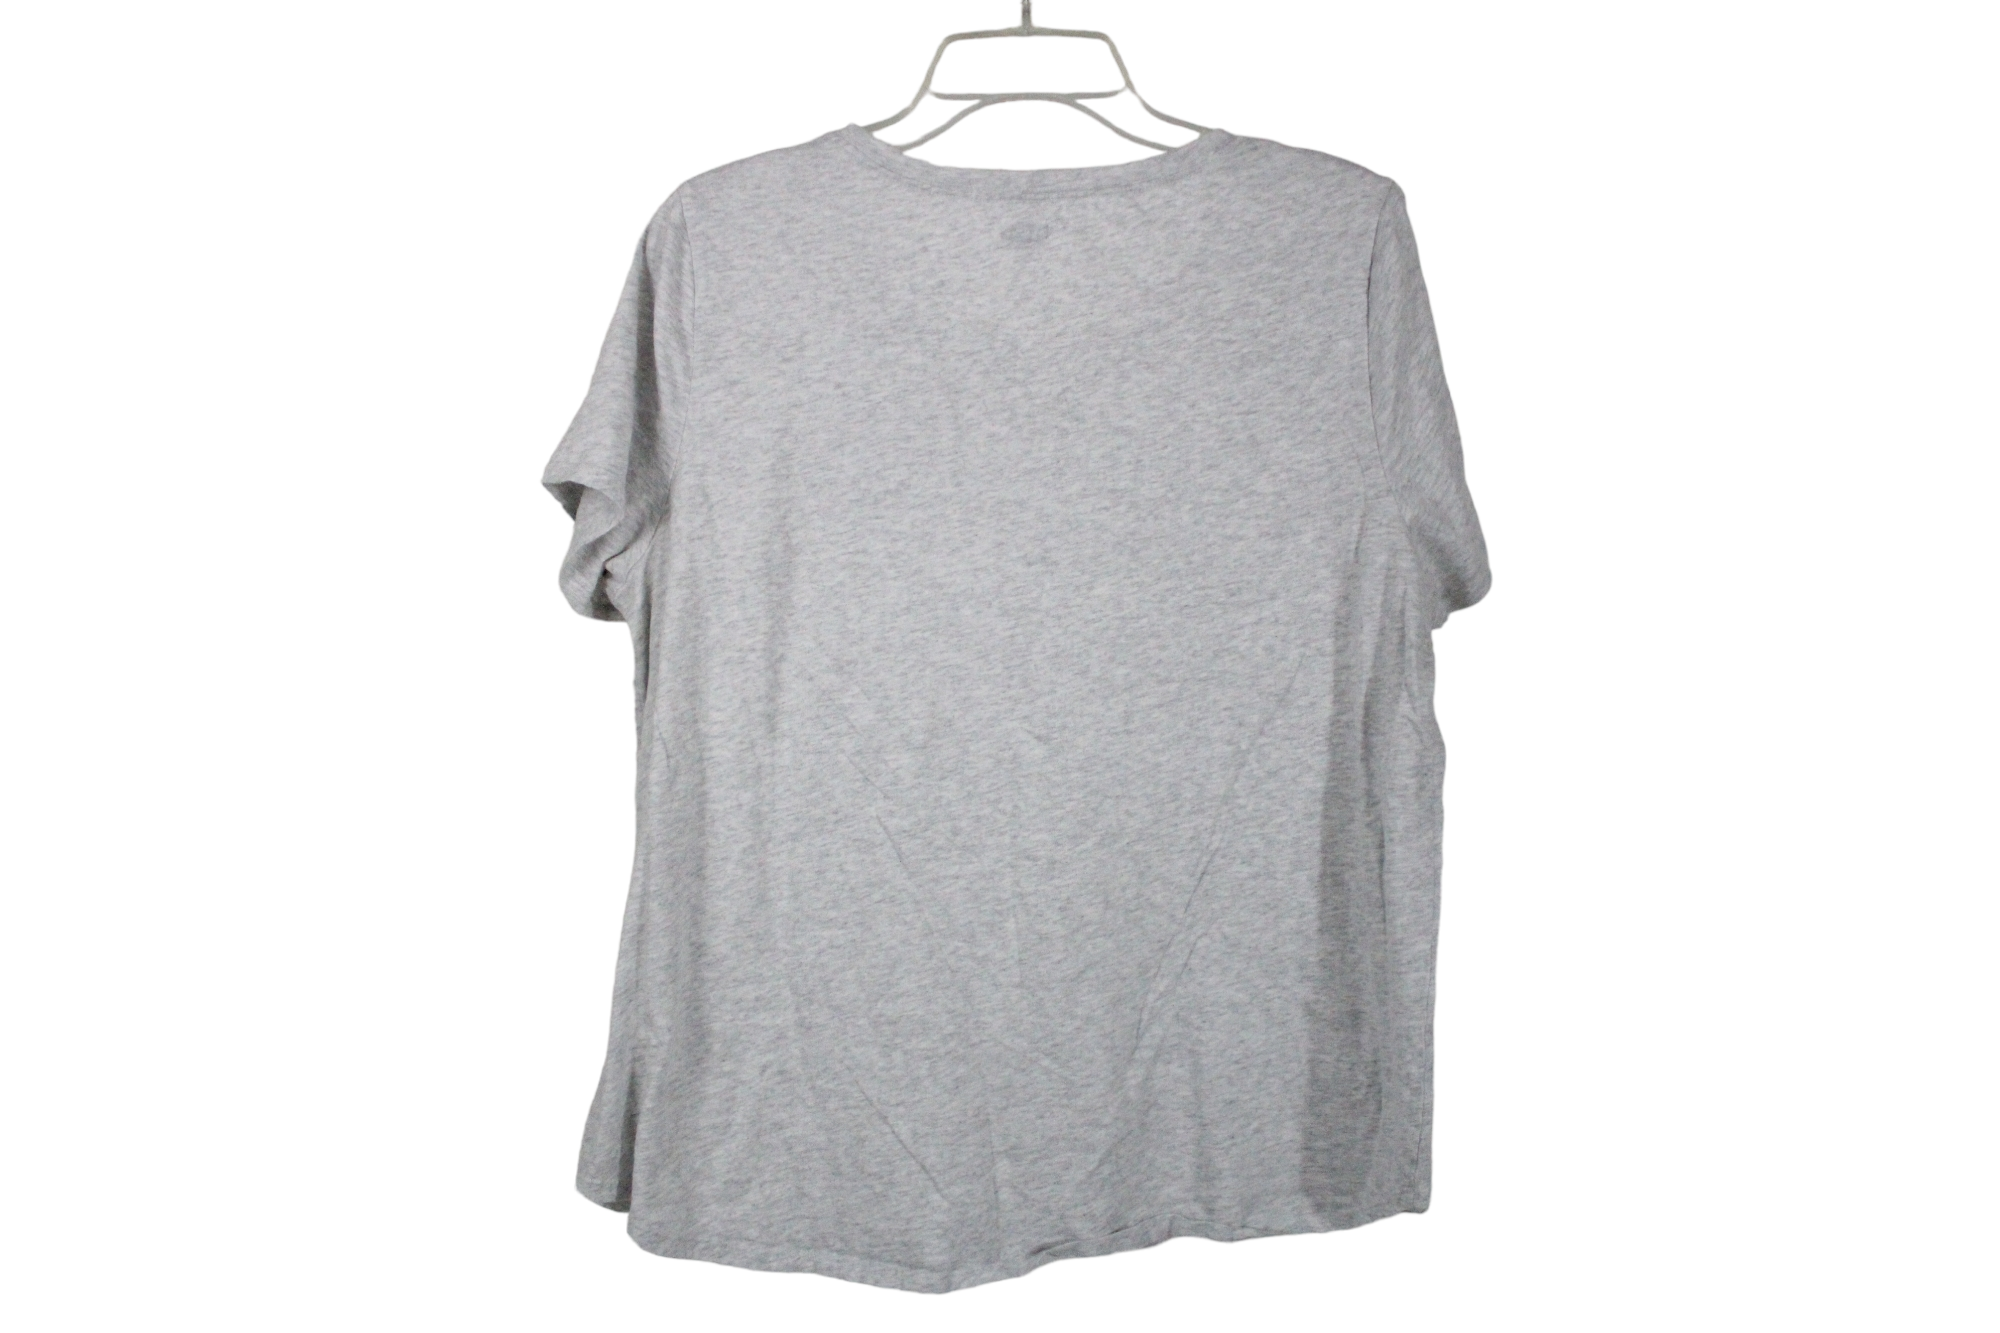 Old Navy Chill Out Gray Polar Bear Tee | XL